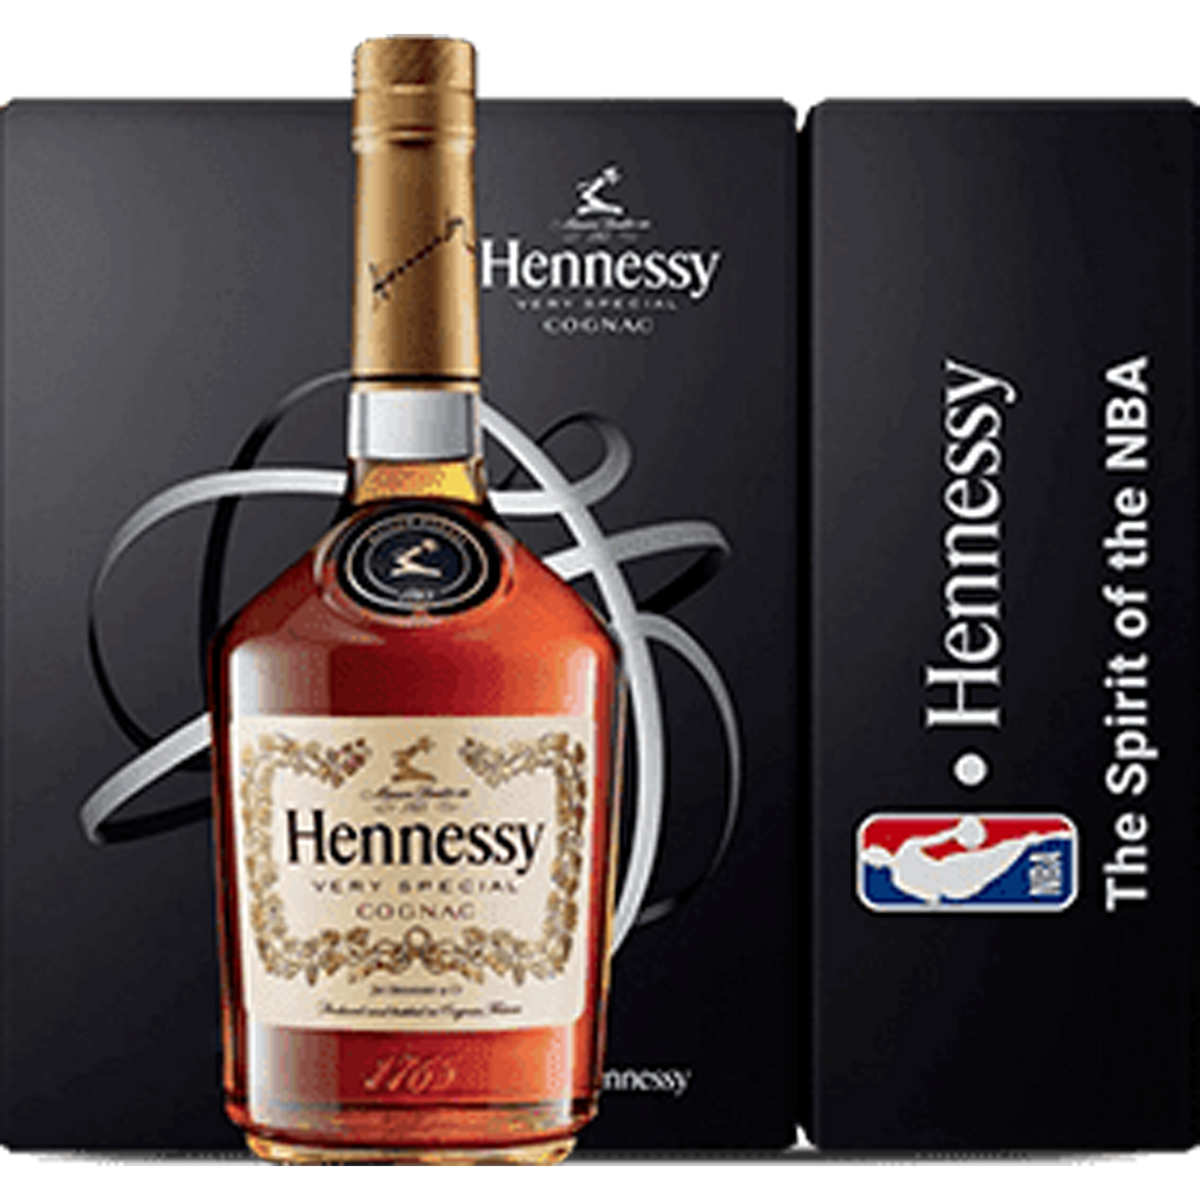 Hennessy Very Special Cognac NBA Box Limited Edition (2022 - black)